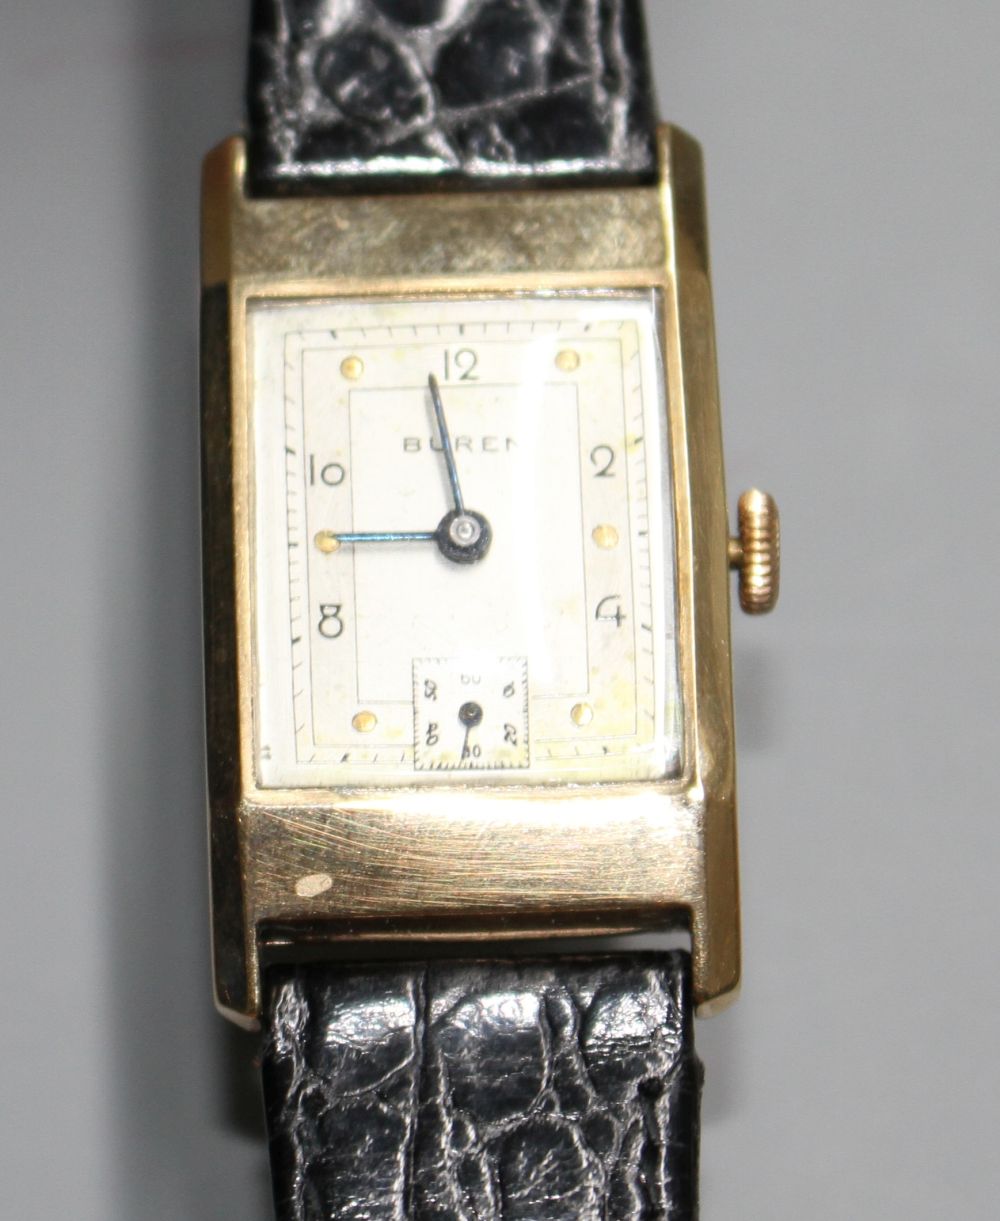 A gentlemans 1940s 9ct gold Buren manual wind wrist watch, with rectangular Arabic dial and subsidiary seconds,